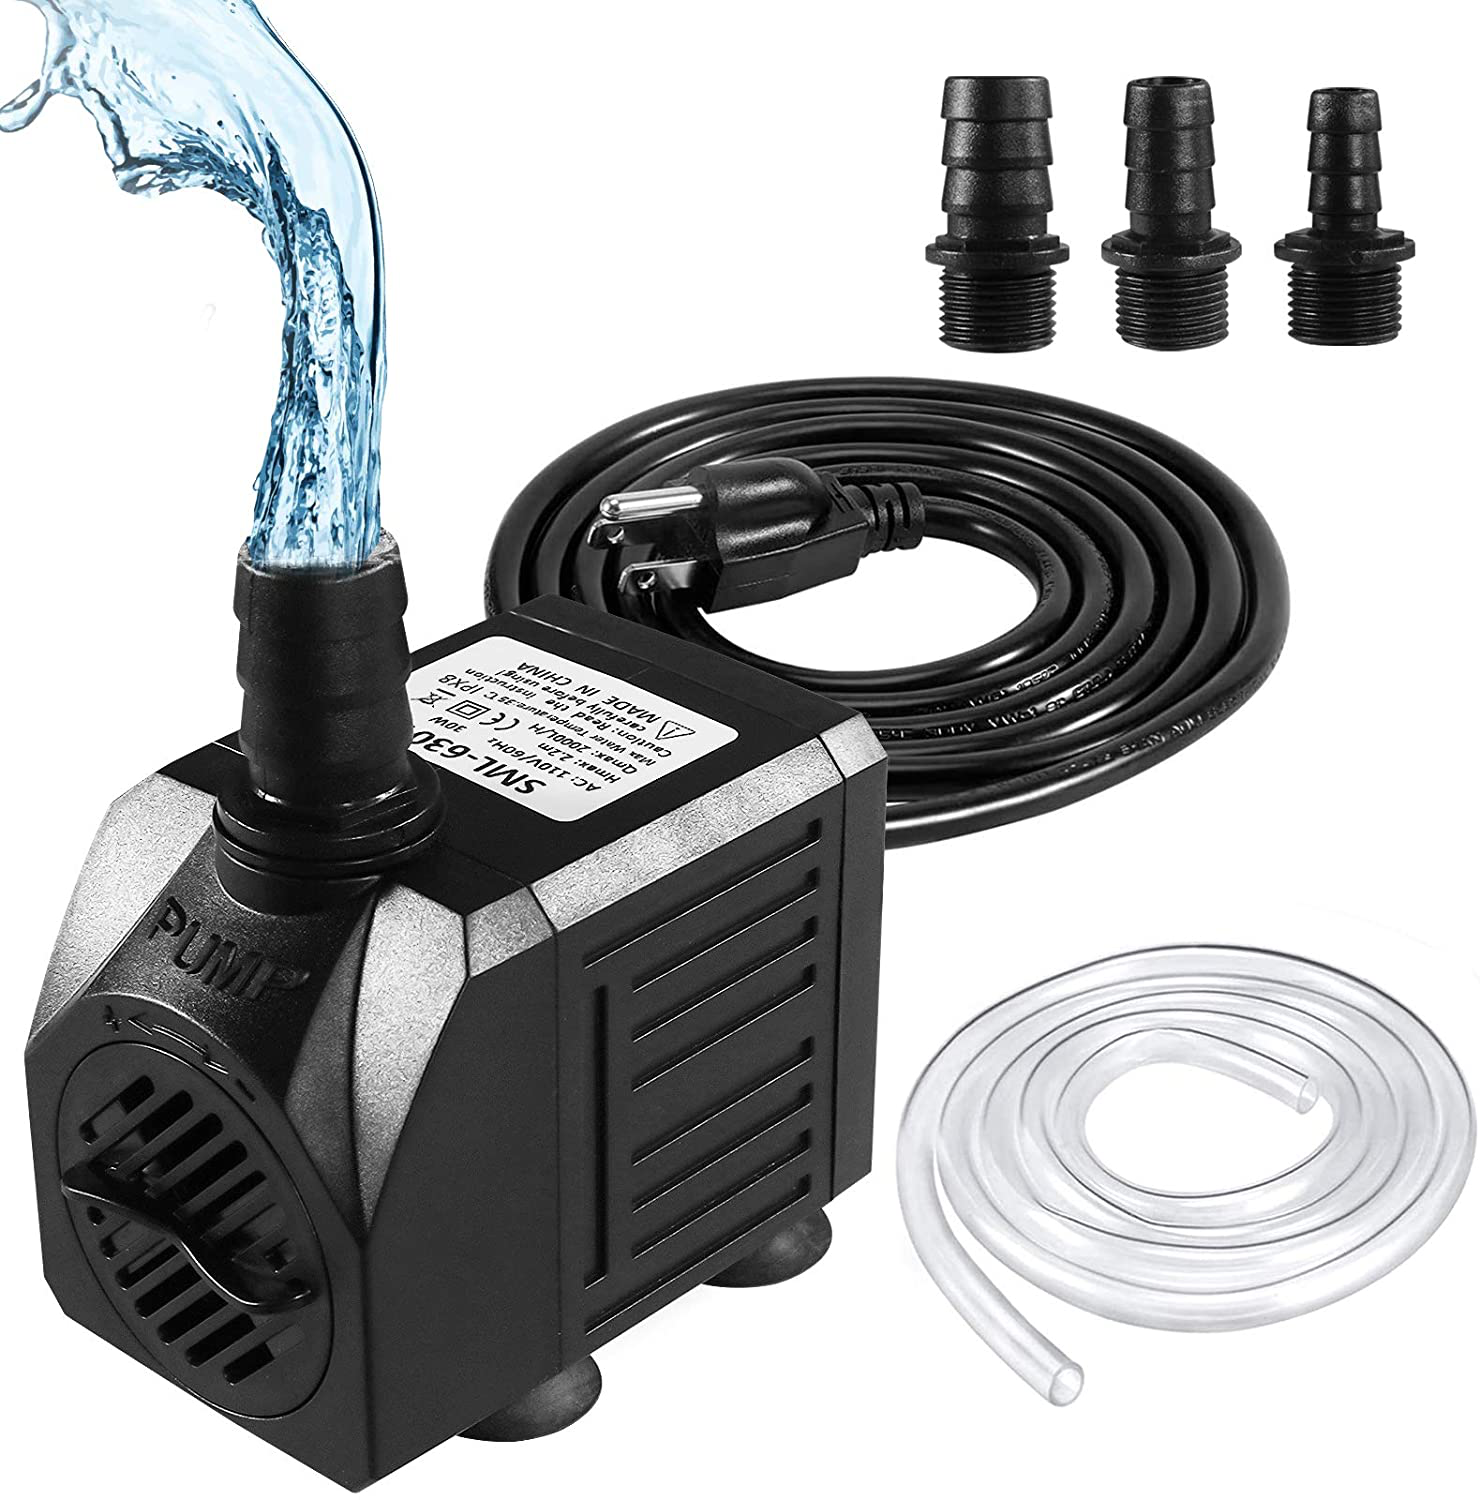 Fountain Pump, 520GPH Submersible Water Pump with Dry Burning Protection, 30W Small Fountain Pond Pump with 6.5Ft Tubing (1/2 Inch ID), 2000L/H, 3 Nozzles for Aquariums, Fish Tank, Hydroponics Animals & Pet Supplies > Pet Supplies > Fish Supplies > Aquarium & Pond Tubing AsFrost 520GPH  